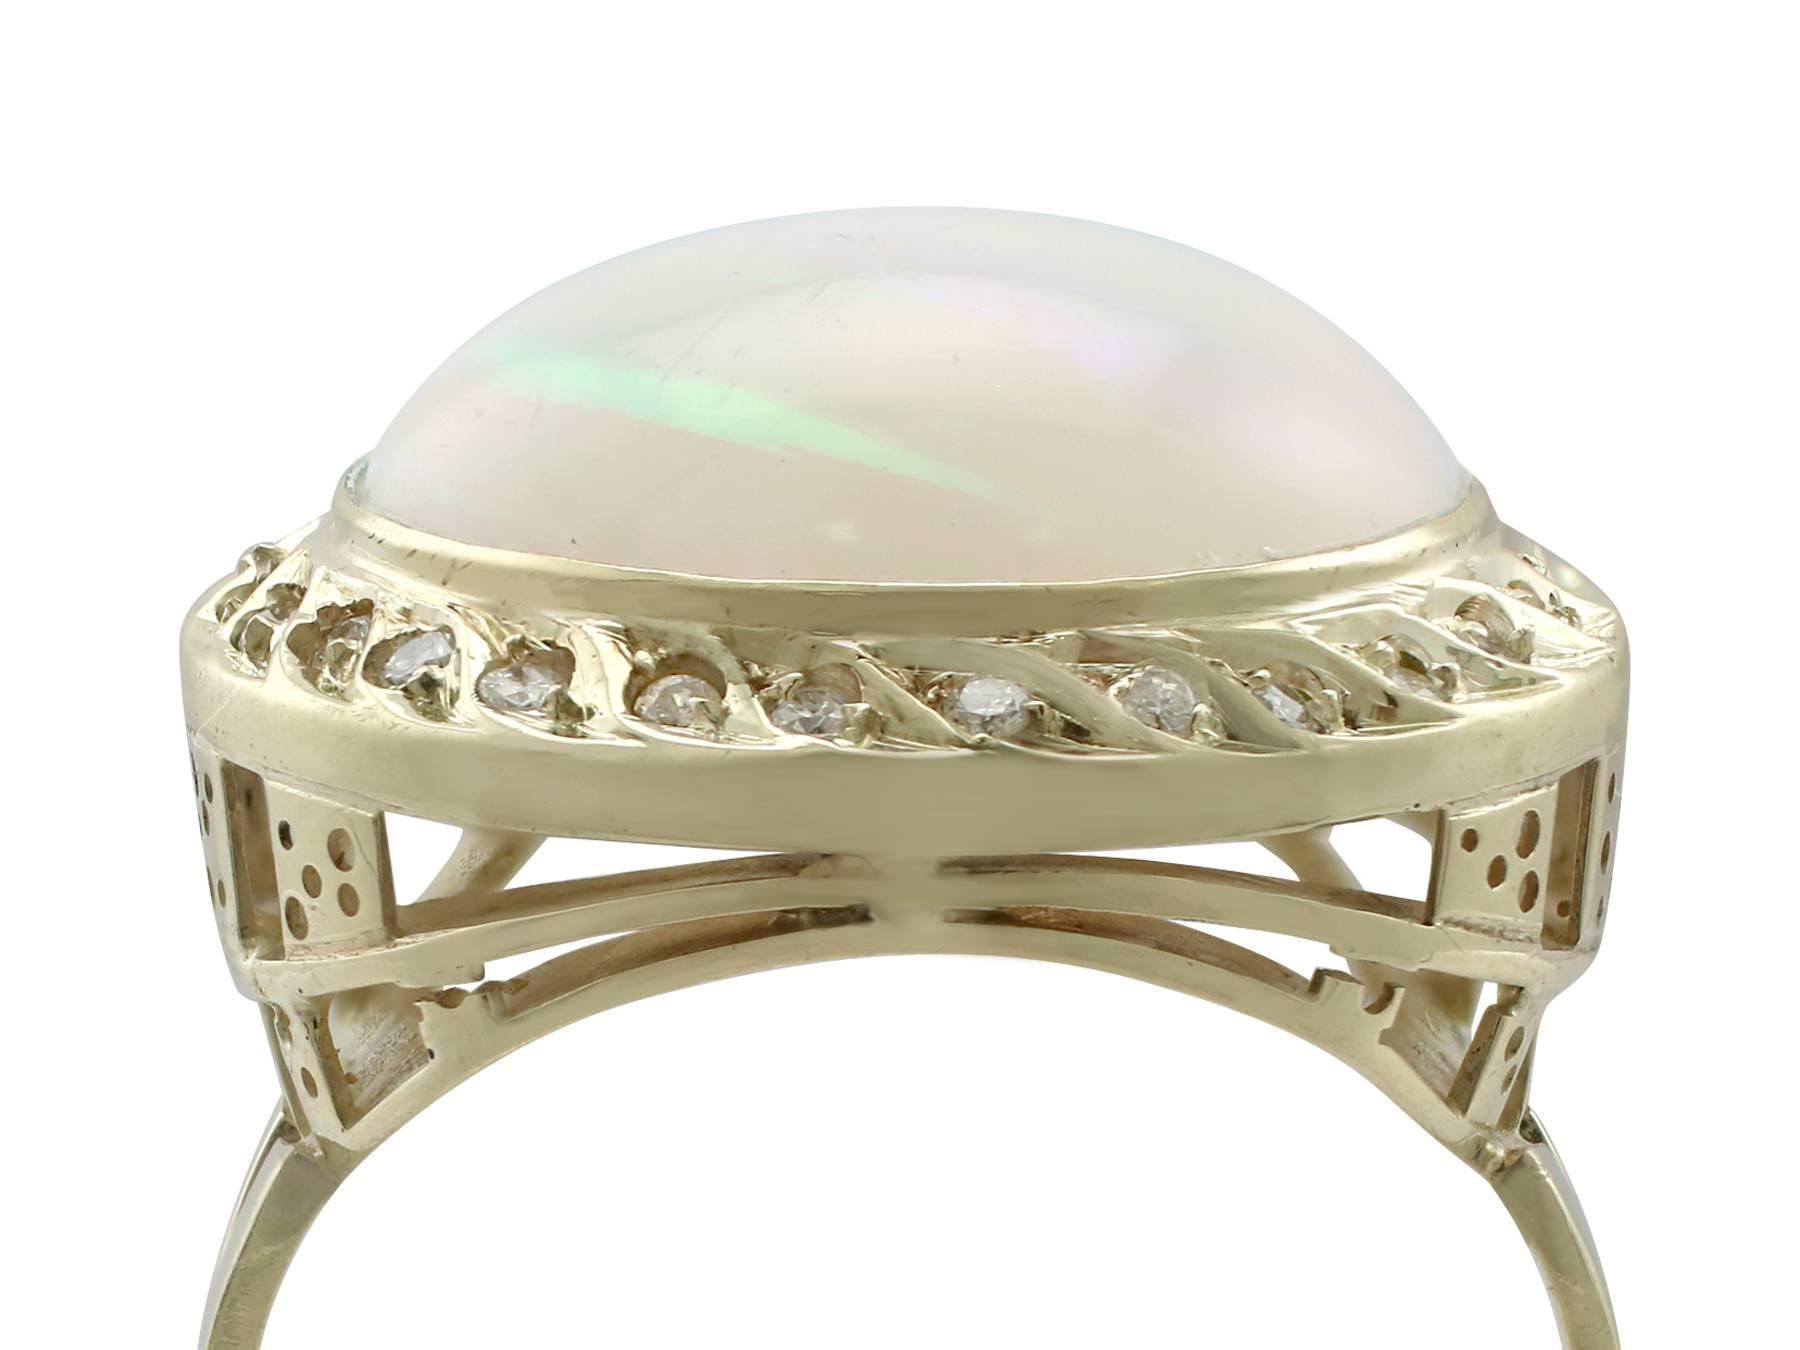 A stunning vintage 4.35 carat opal and 0.27 carat diamond, 14 karat yellow gold cocktail ring; part of our diverse vintage jewelry and estate jewelry collections

This stunning, fine and impressive vintage opal ring with diamond has been crafted in